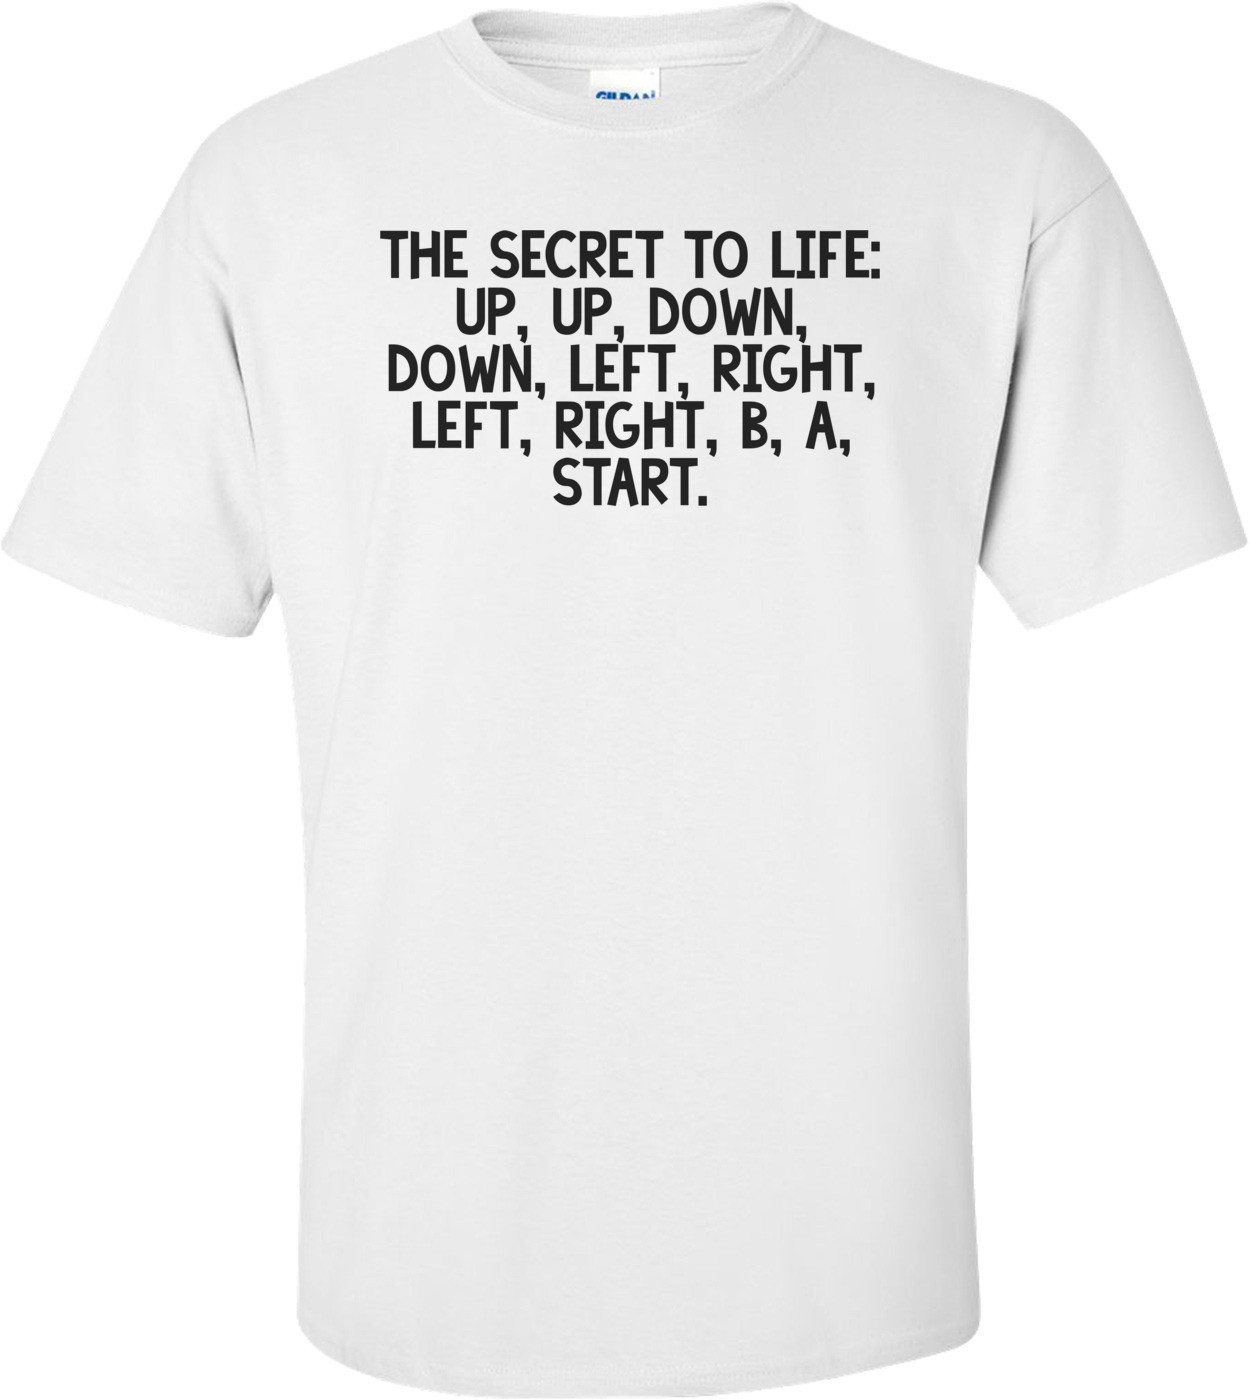 The secret to life: up, up, down, down, left, right, left, right, b, a, start. Shirt